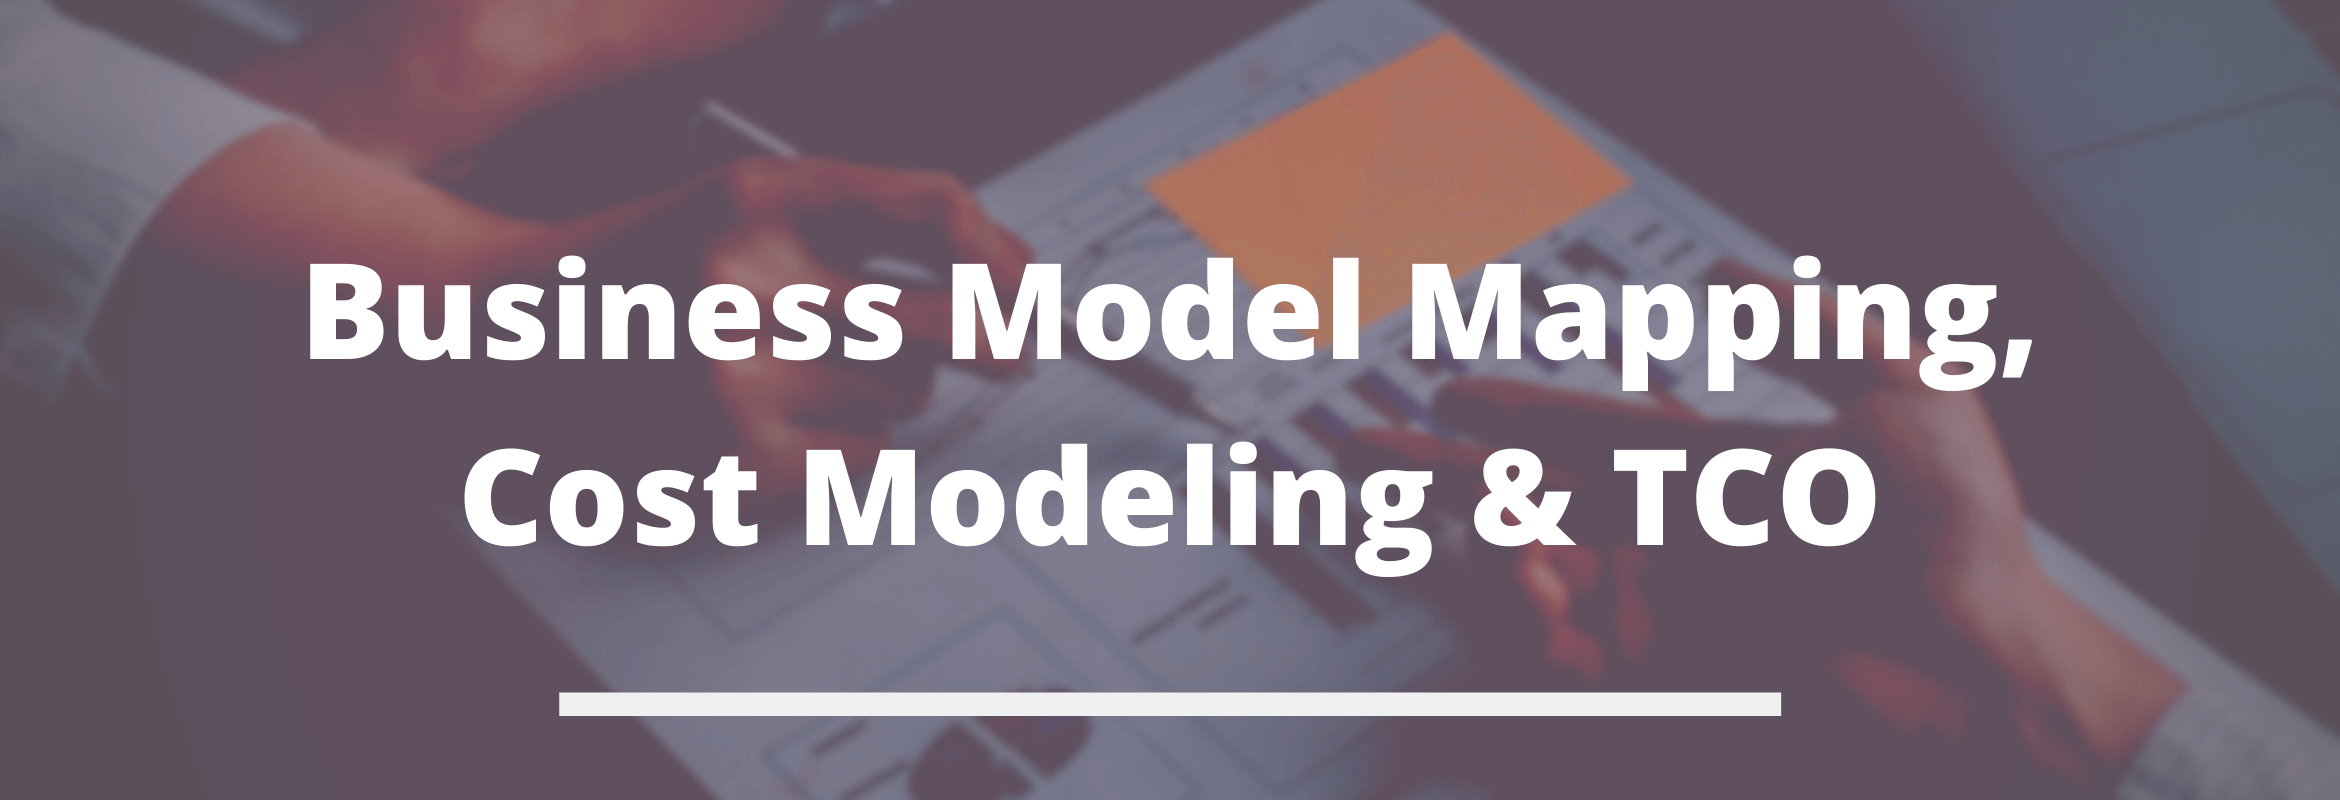 Image of Business modeling